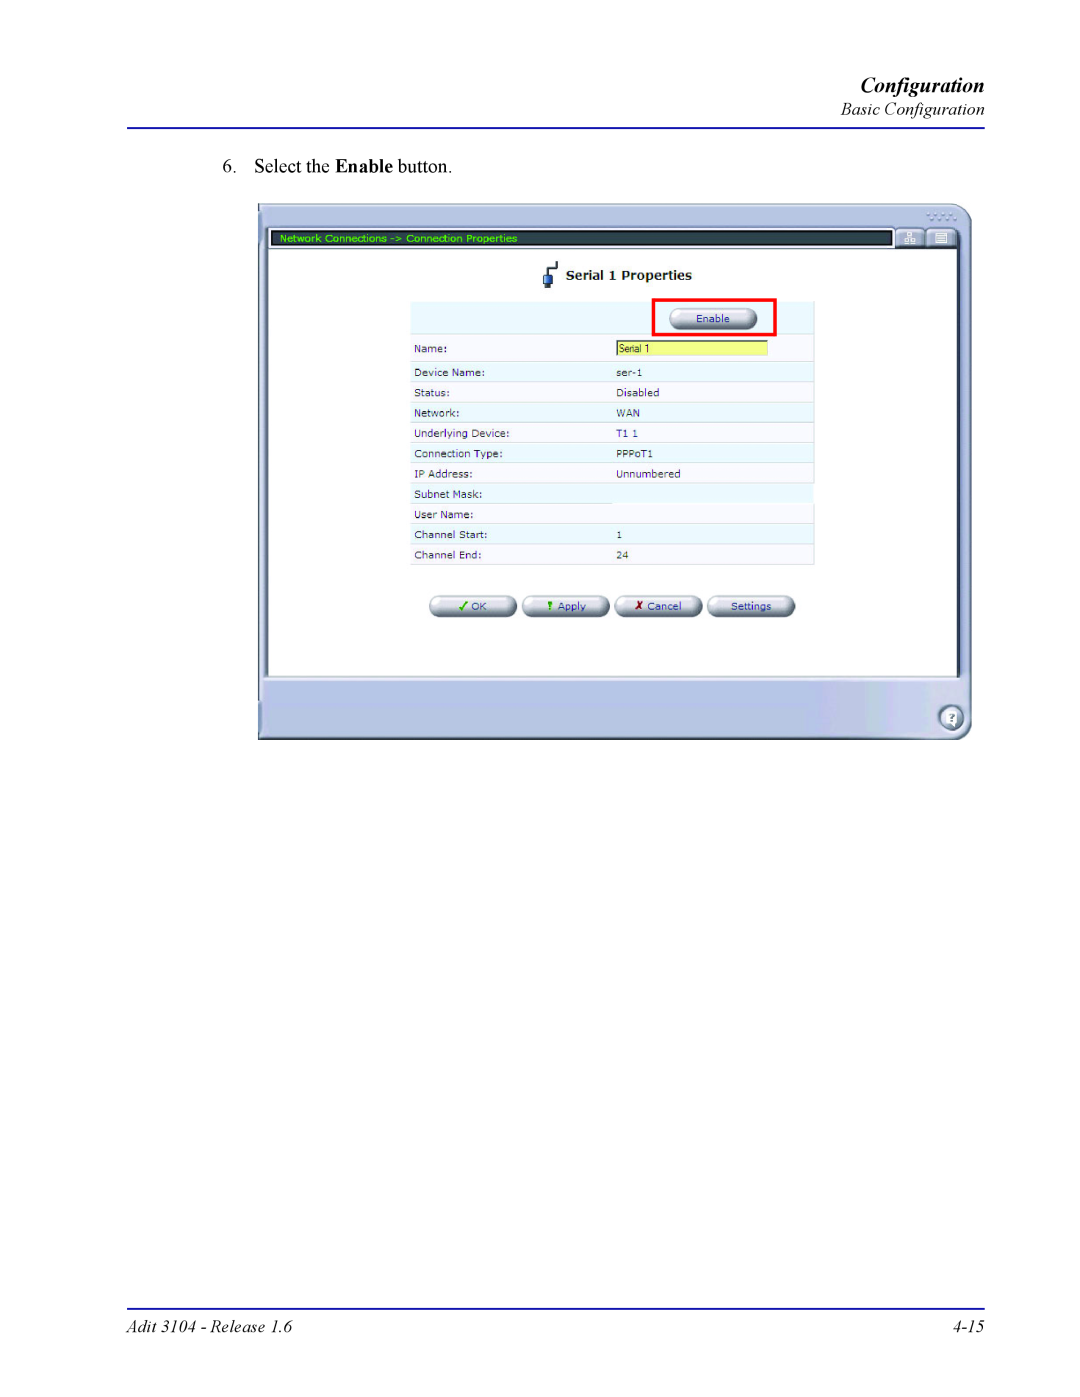 Carrier Access Adit 3104 user manual Configuration, Select the Enable button 